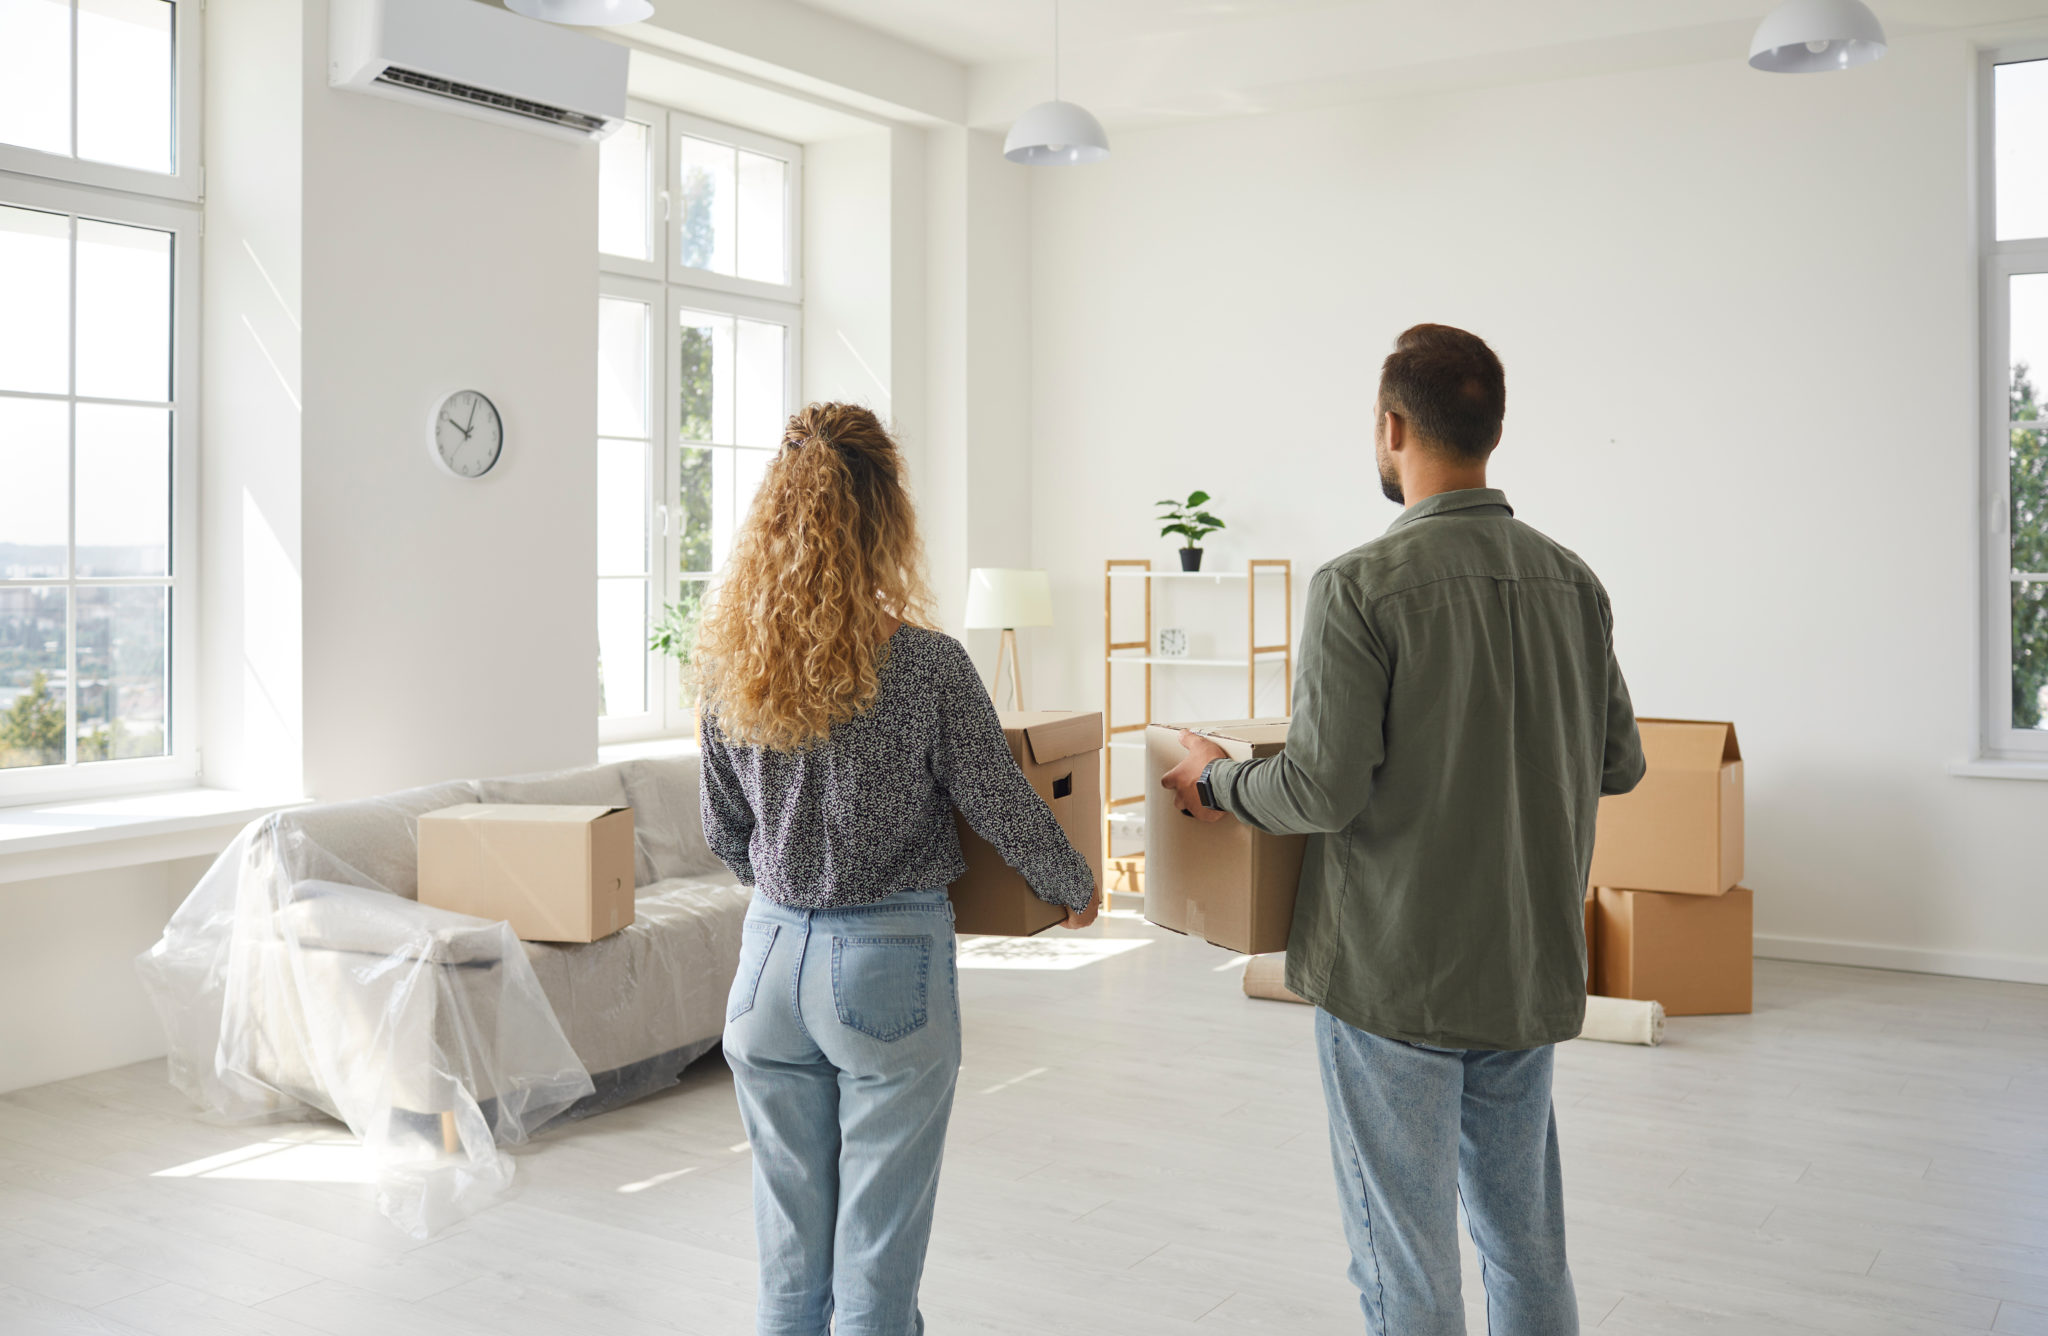 New Homeowner Checklist: Simplifying Your House’s Needs